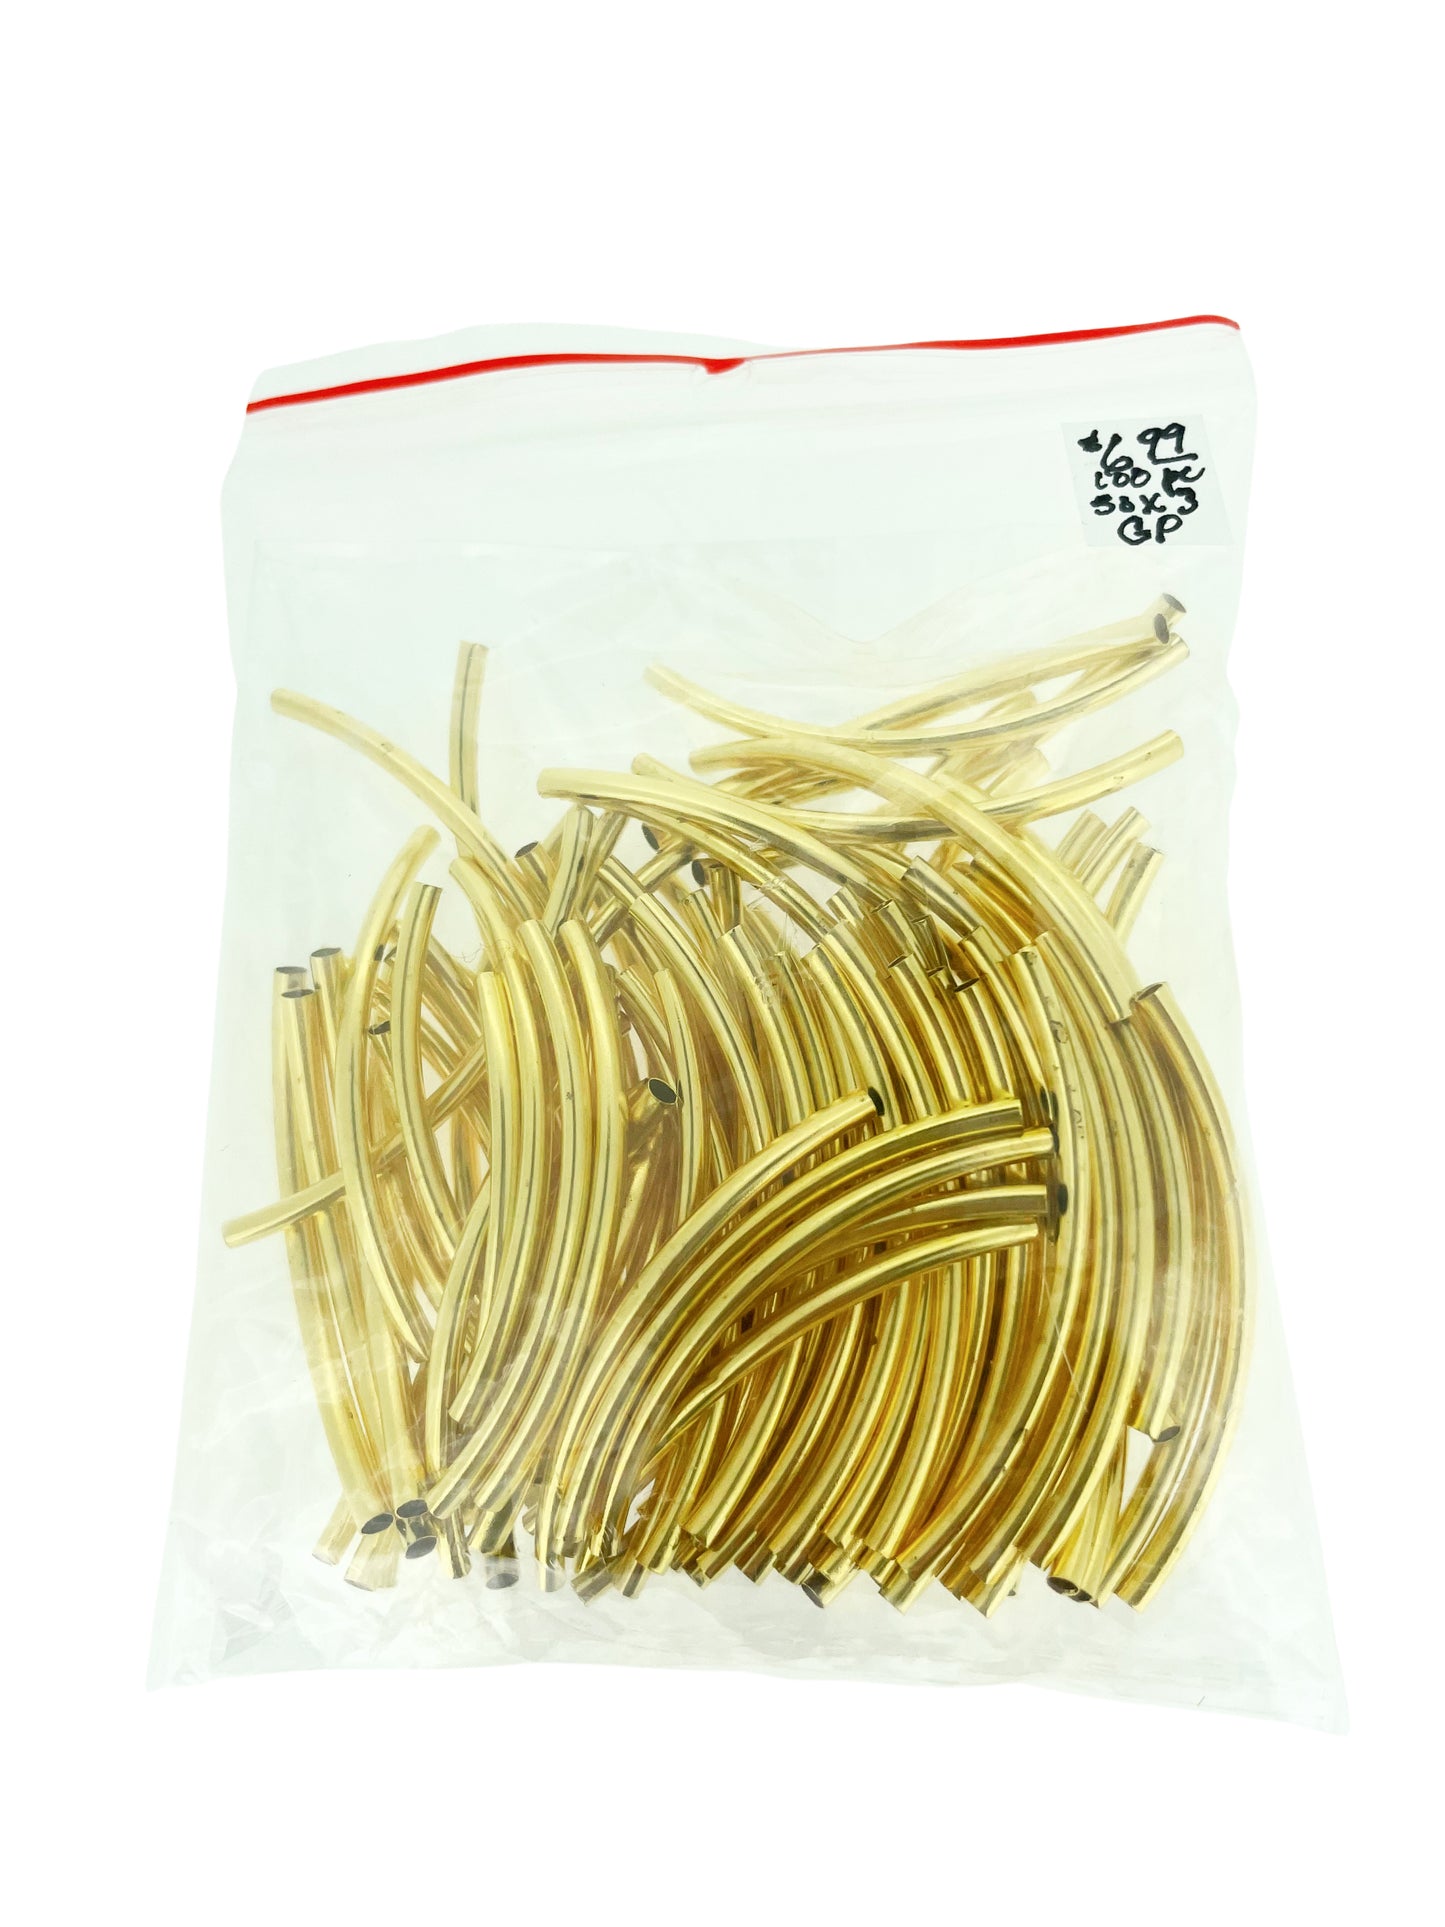 Gold Plated Spacer Tubes, 50x3mm, 100 pc per Package